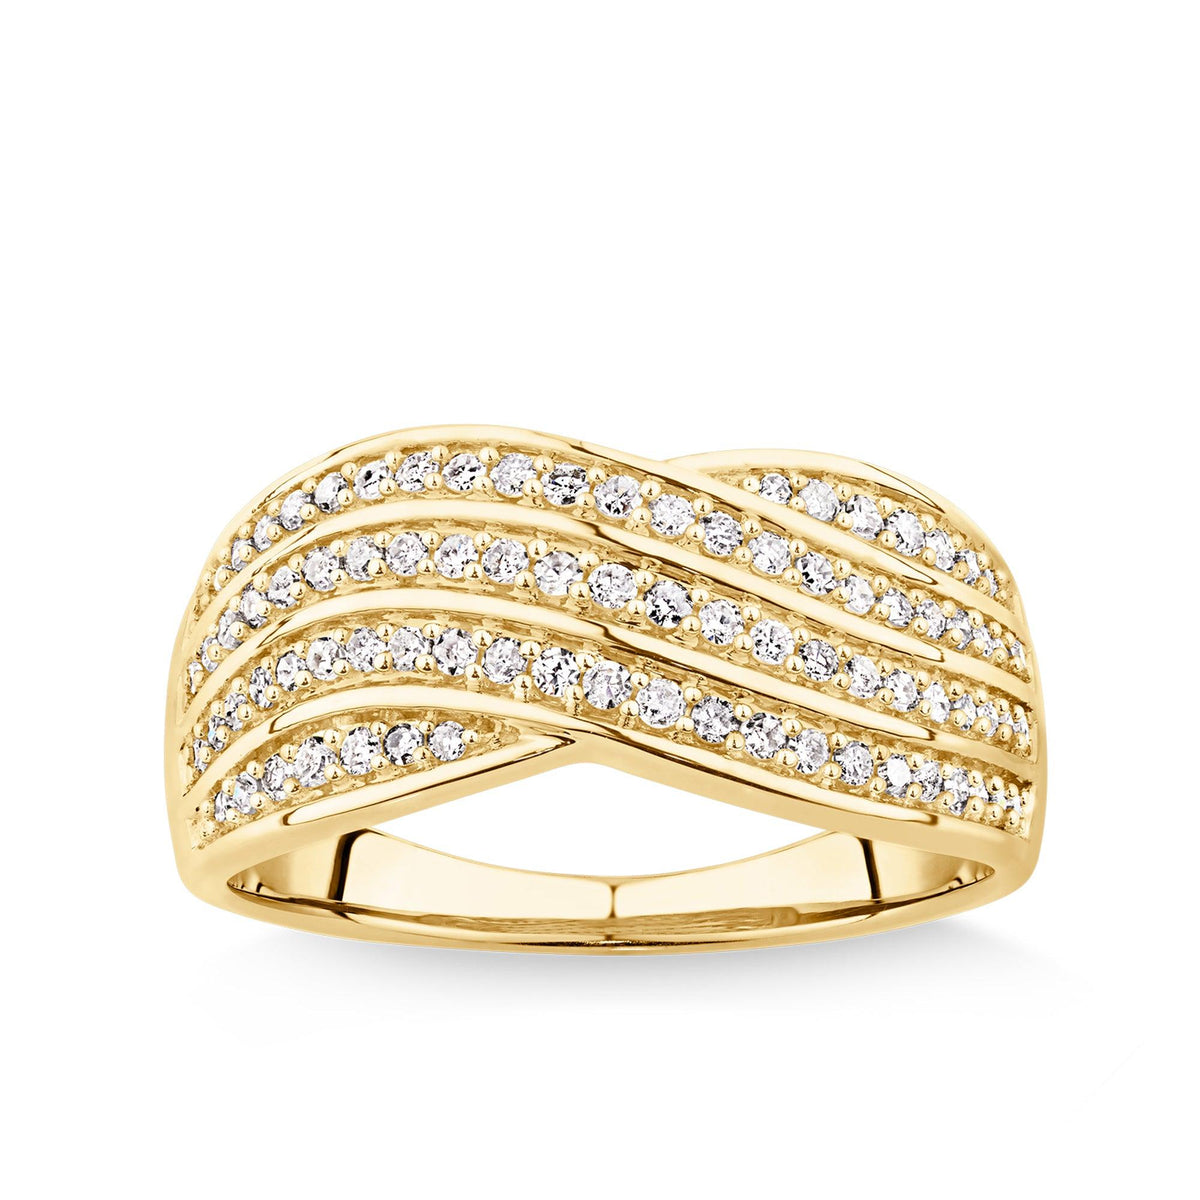 0.40ct TW Diamond Dress Ring in 9ct Yellow Gold - Wallace Bishop